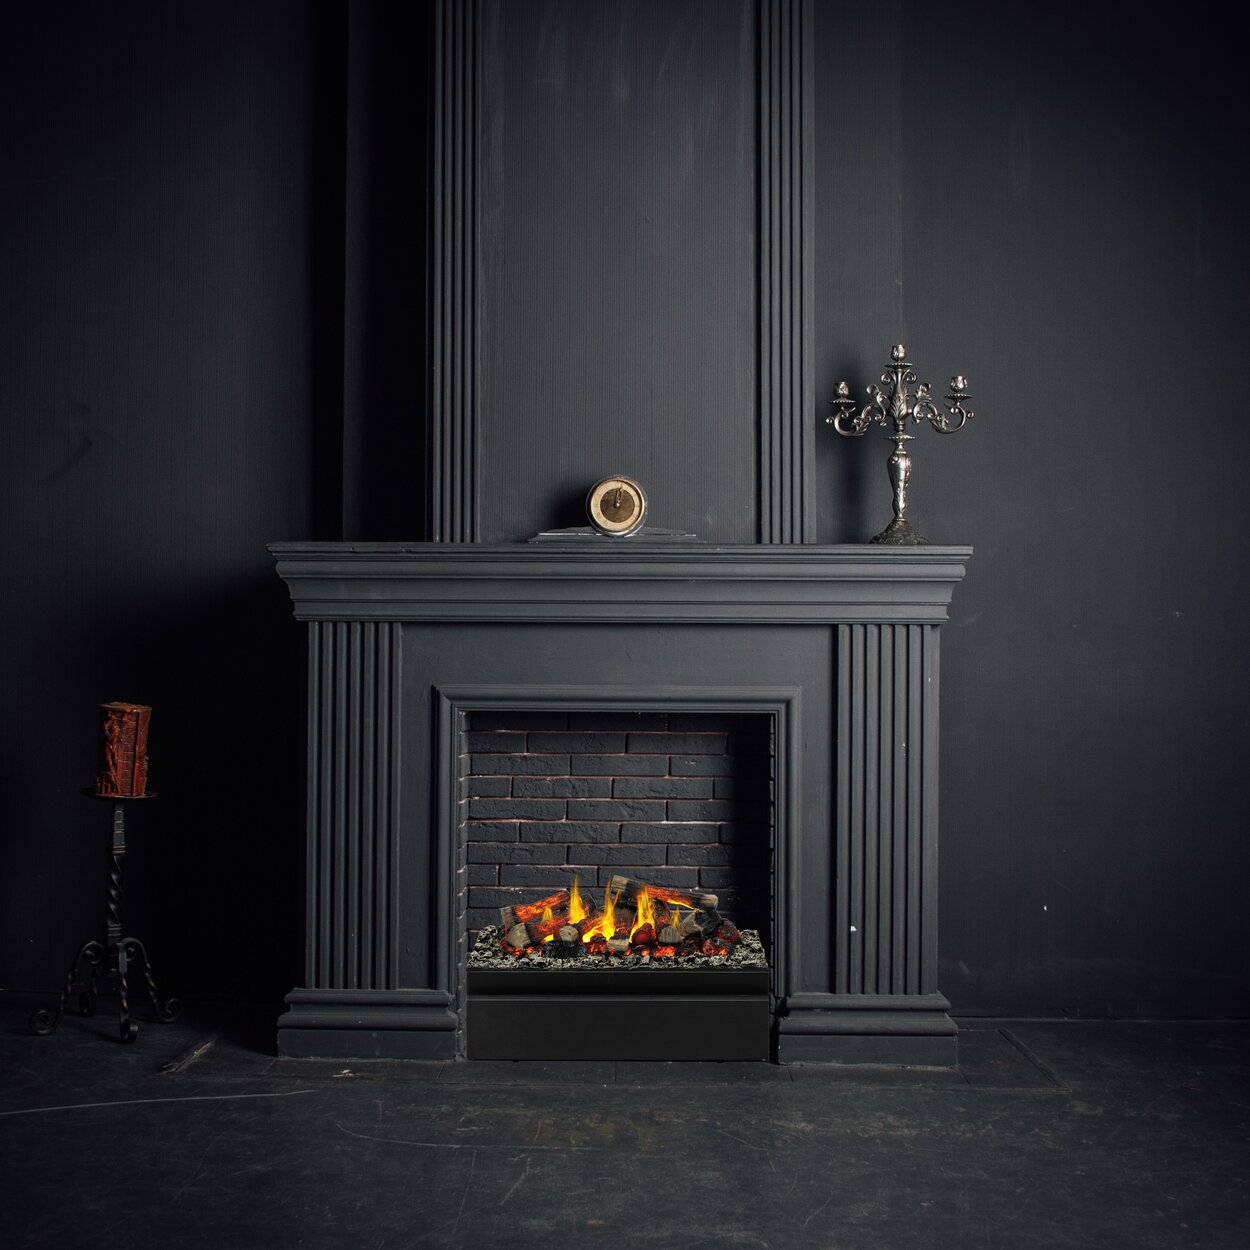 The Juneau electric fire was installed in a disused fireplace made of black stone.